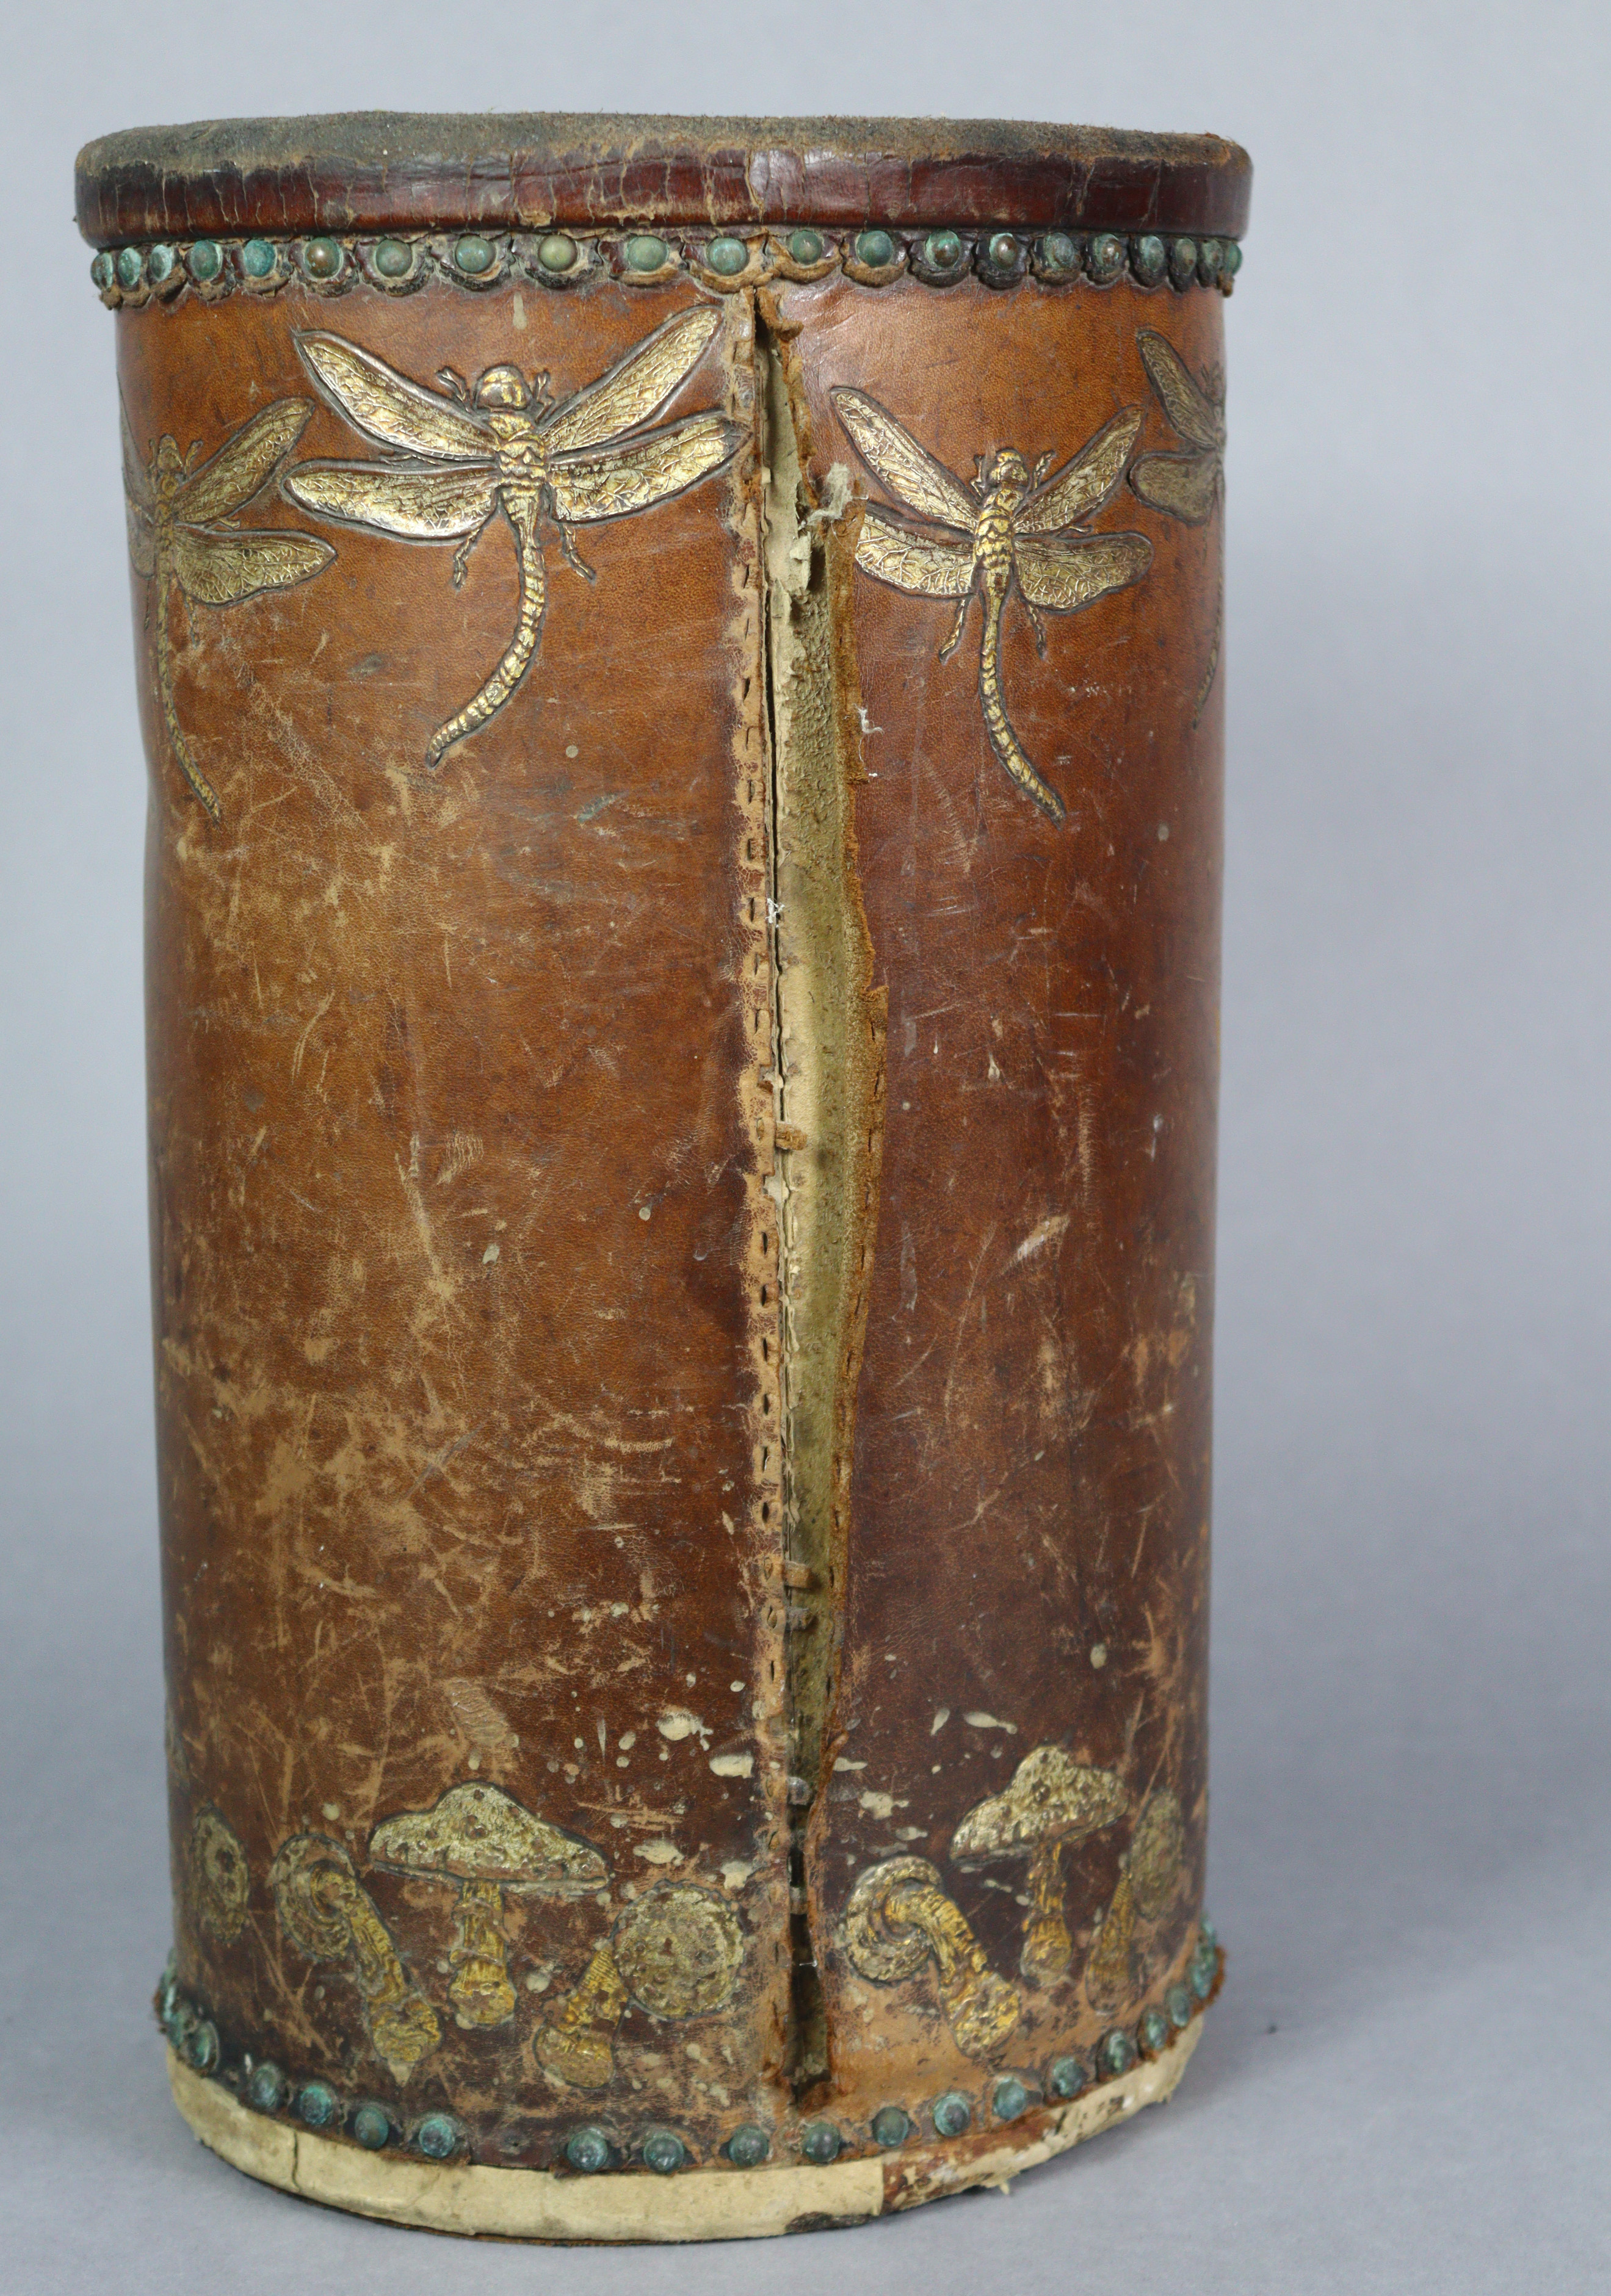 A GEORGE HULBE of Hamburg LEATHER-COVERED STICK-STAND or paper bin, with gilt tooled decoration of - Image 4 of 6